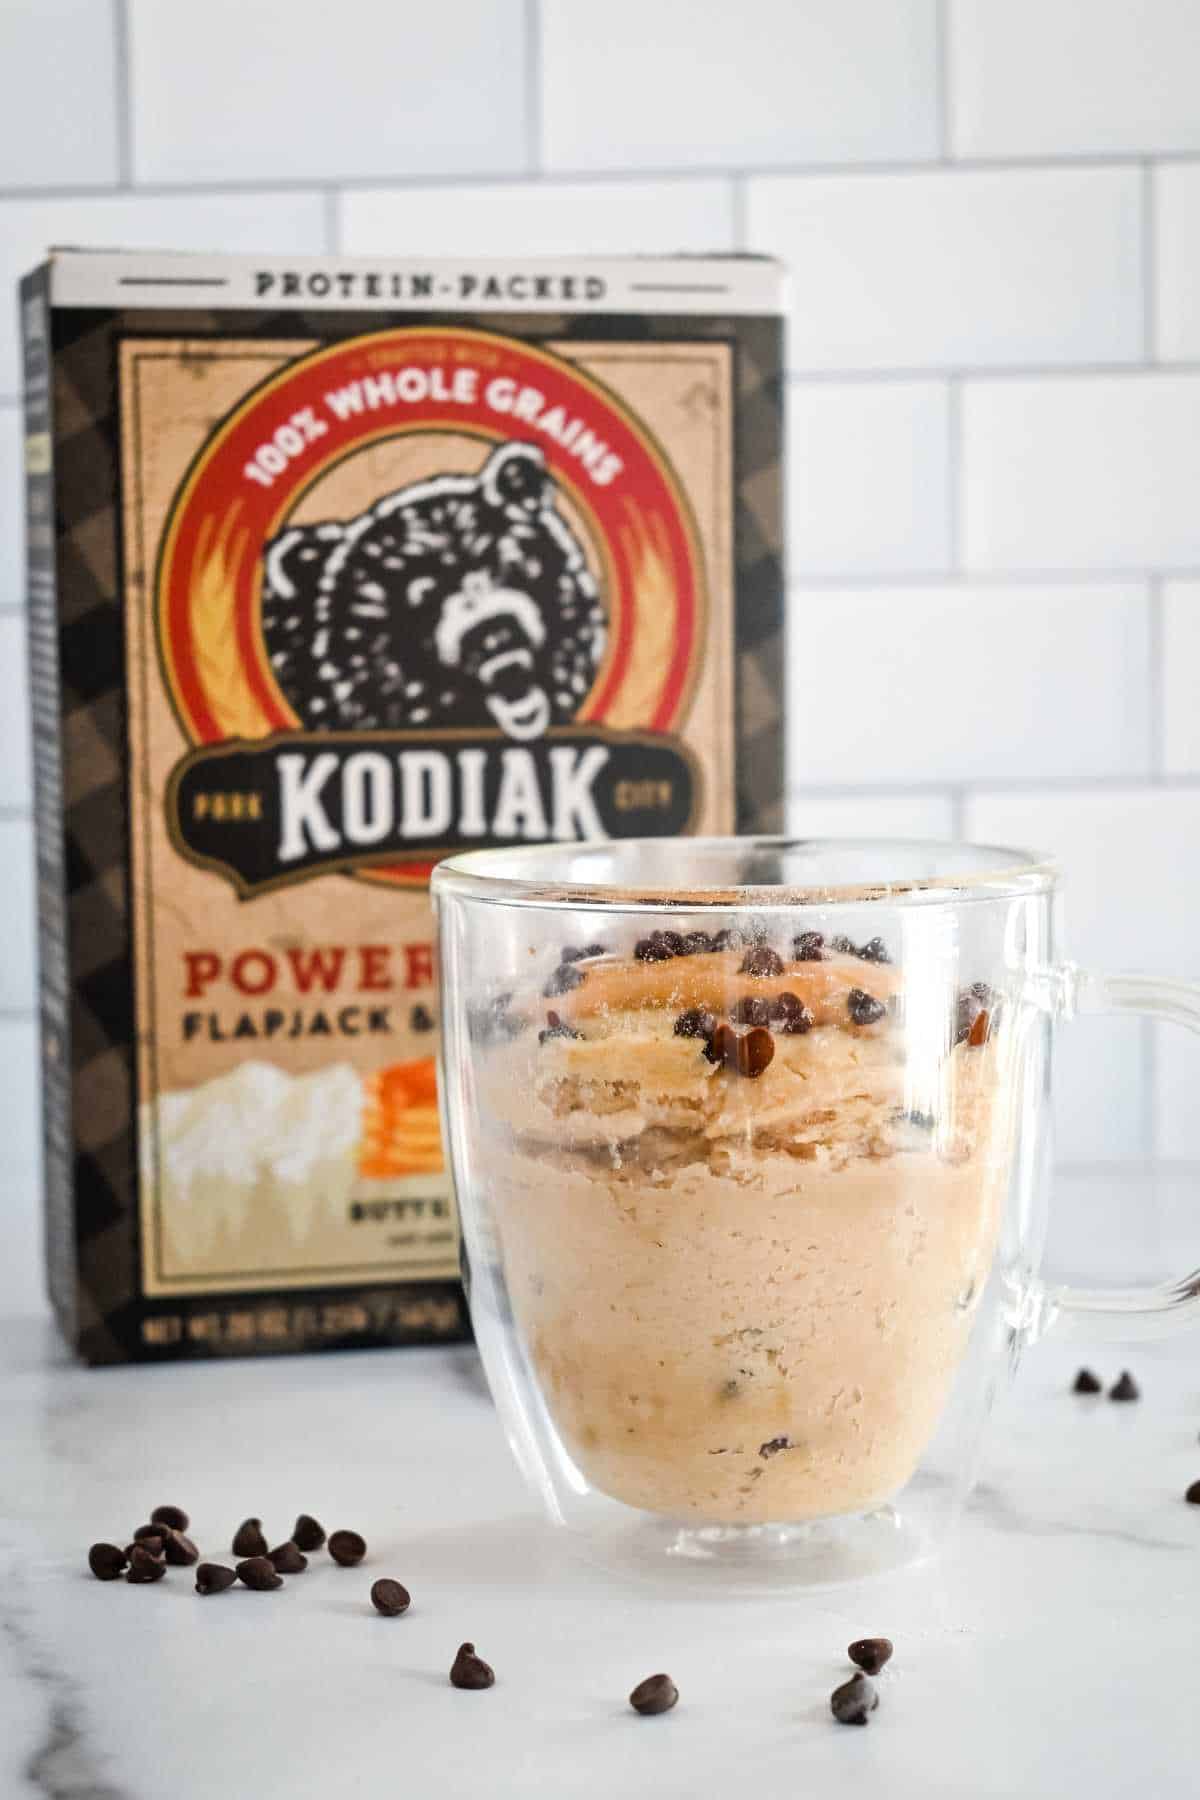 front view of kodiak cakes box behind pancake in a clear glass mug with chocolate chips and peanut butter.